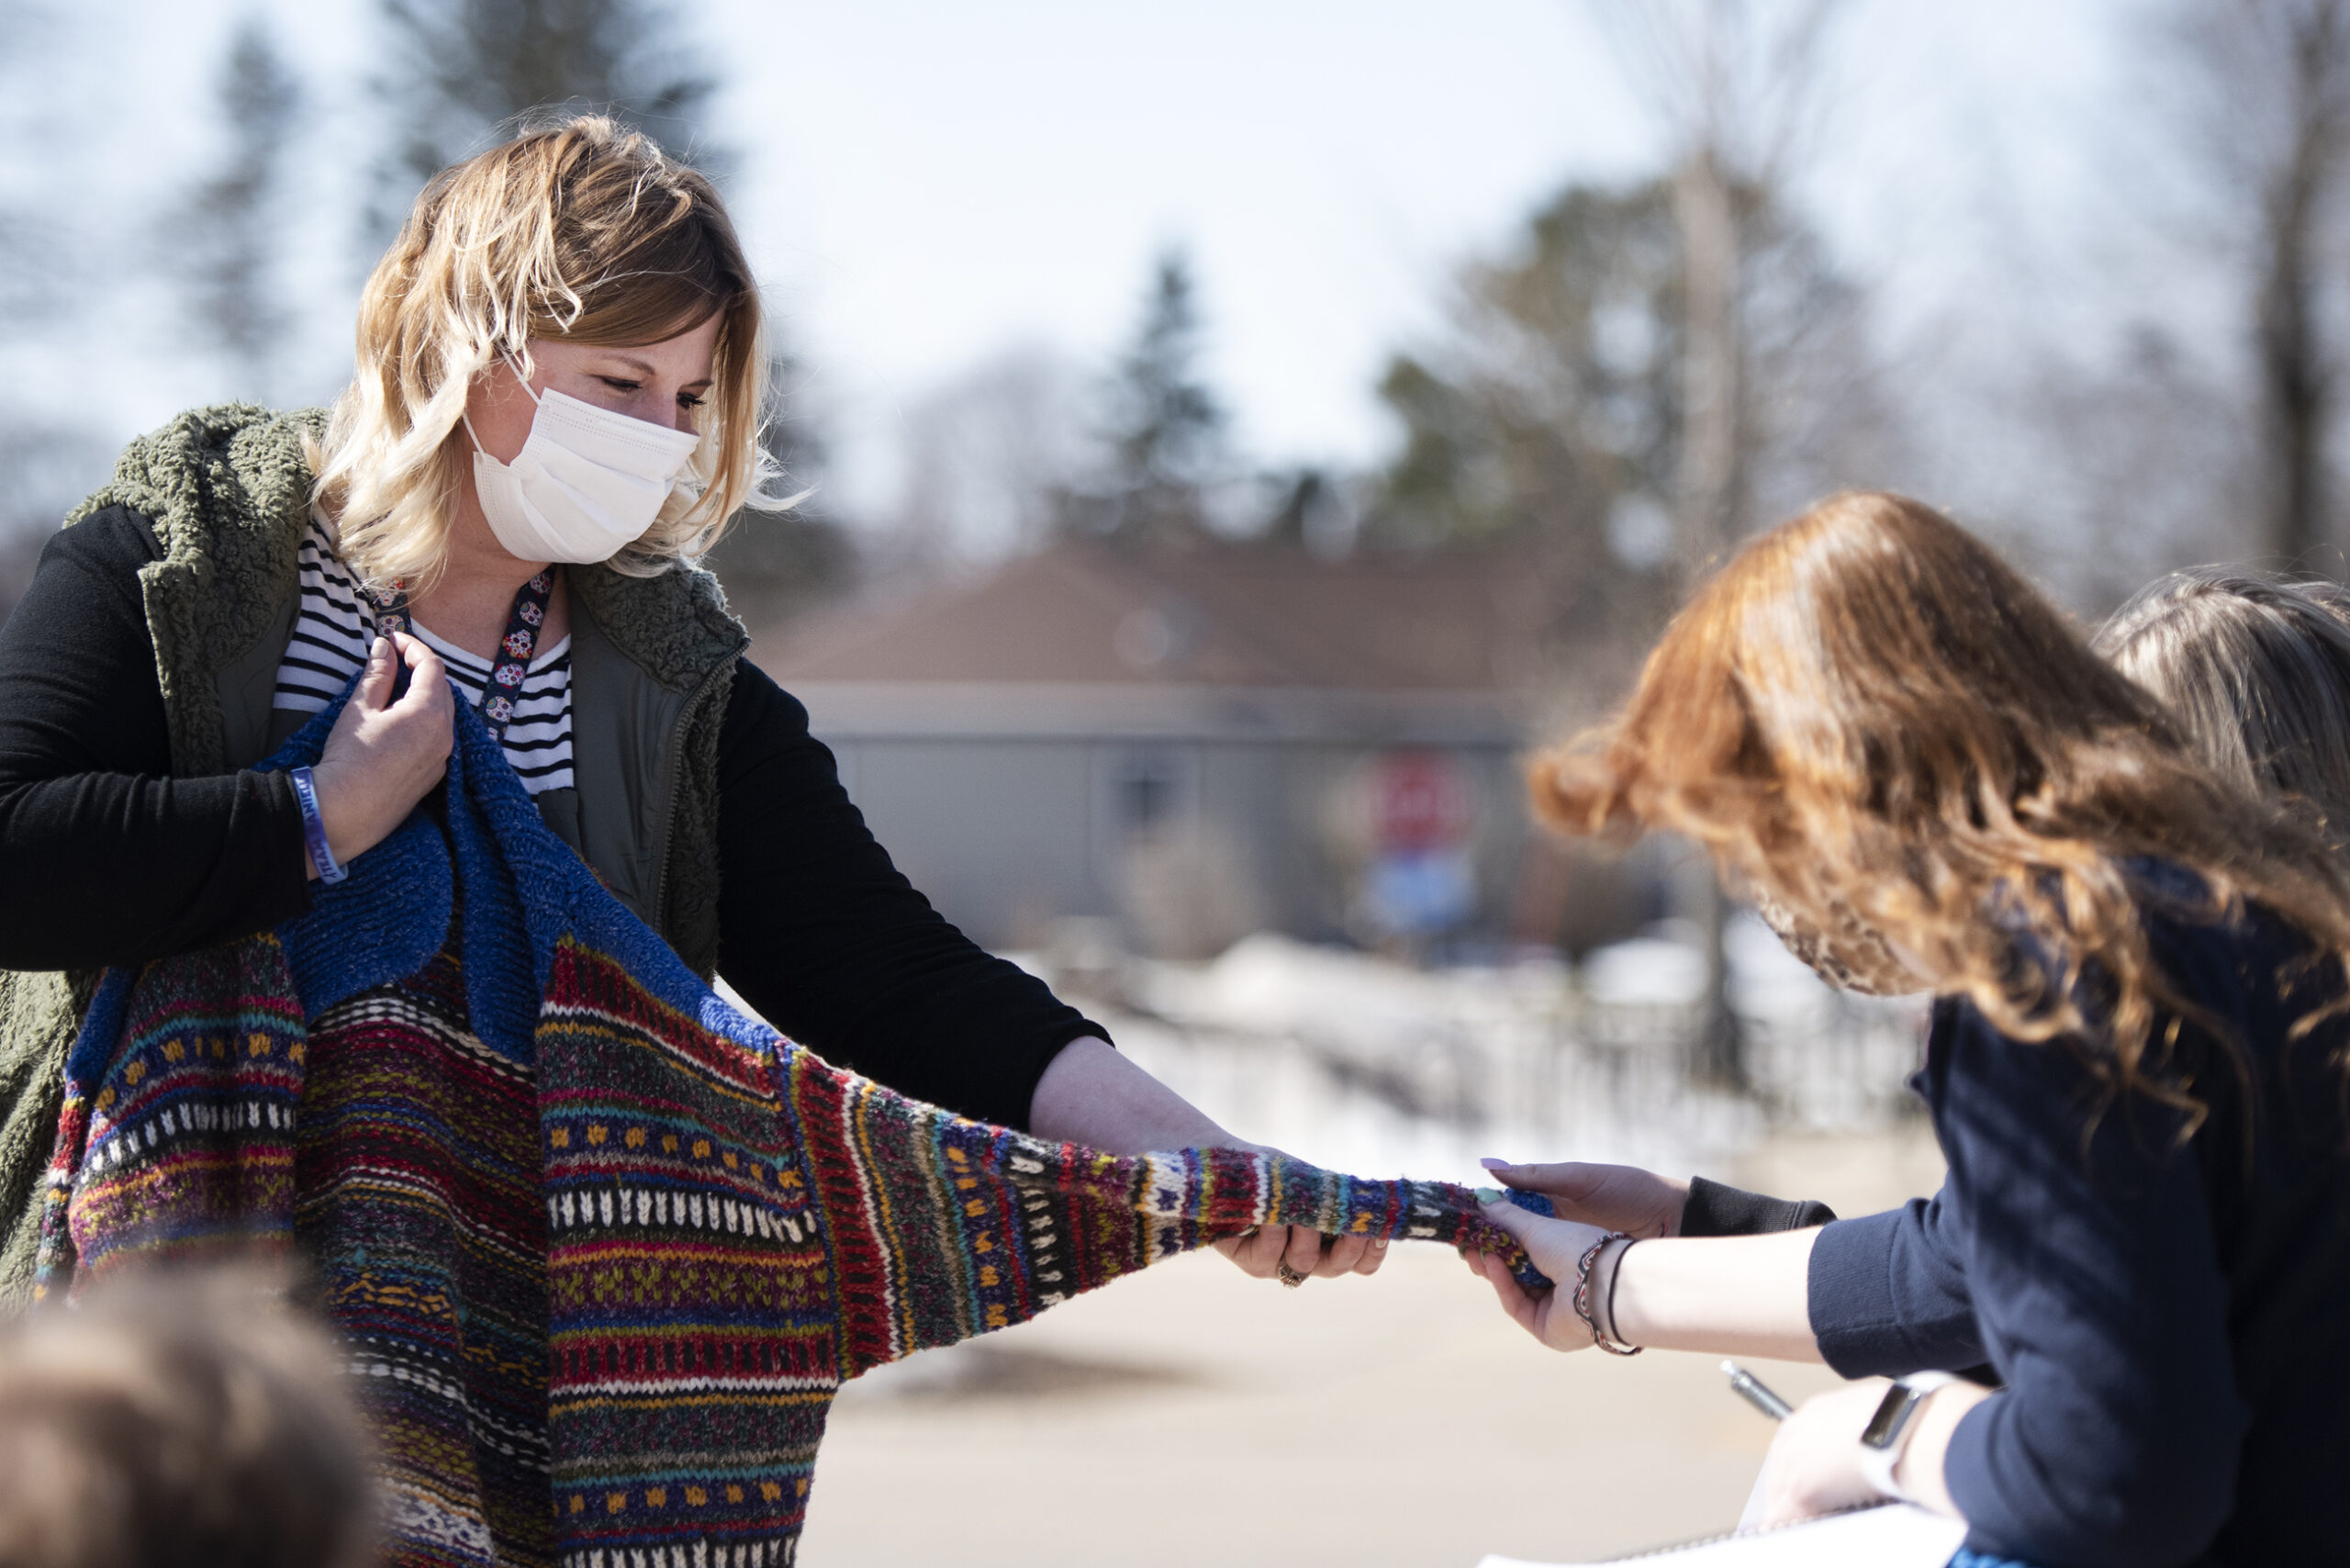 A woman in a face mask holds the arm of a sweater out to students who reach out and touch it.